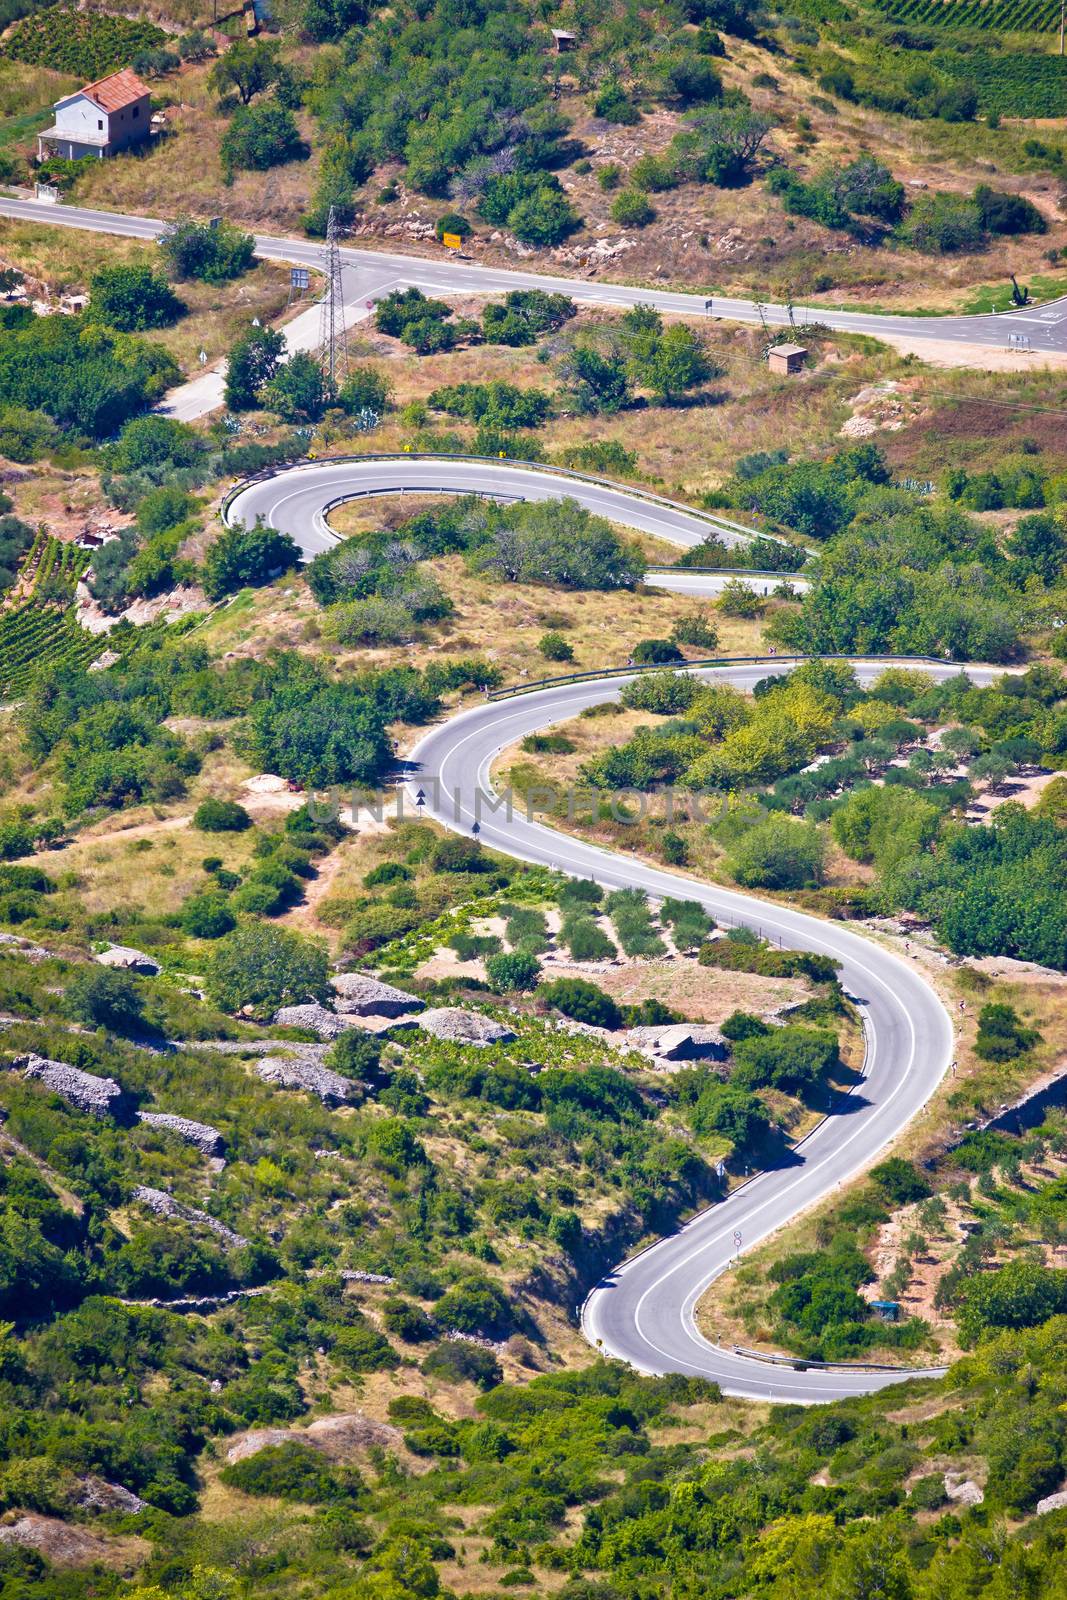 Island of Vis curvy road vertical view by xbrchx